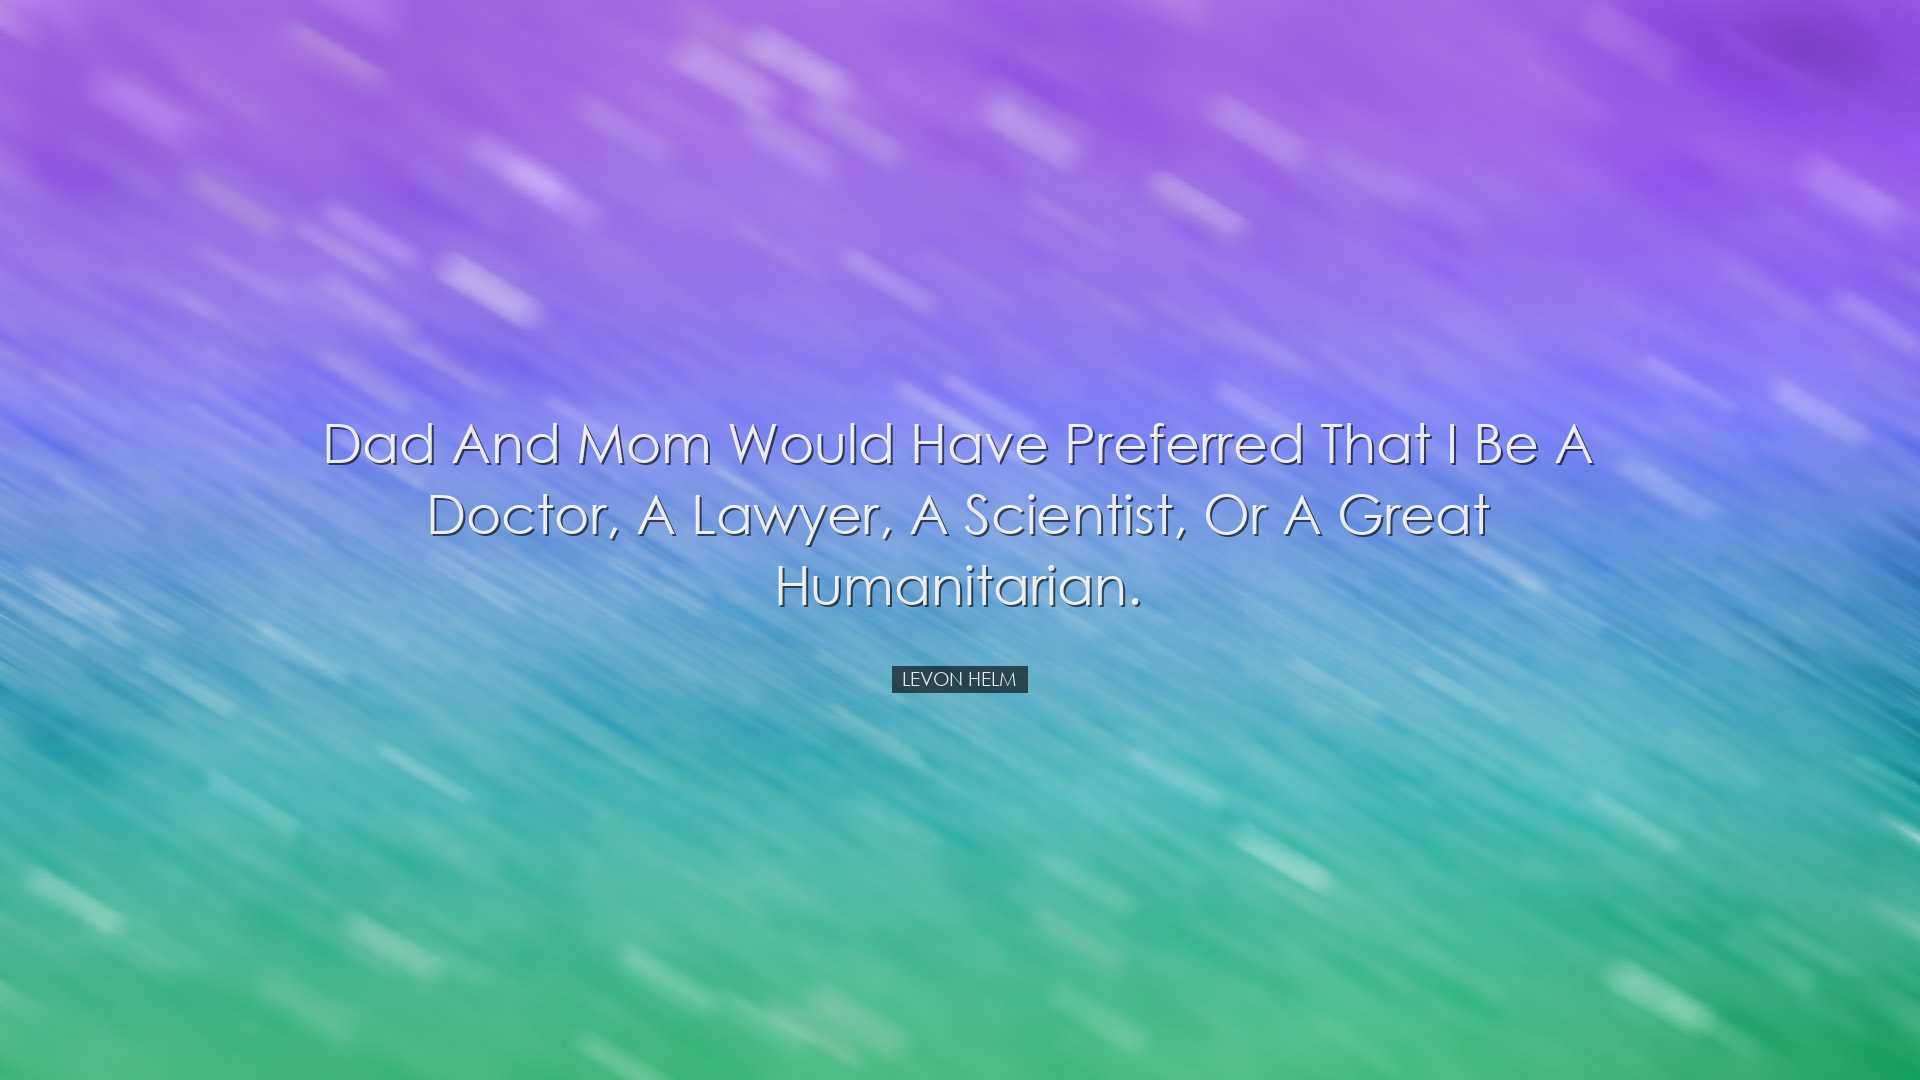 Dad and mom would have preferred that I be a doctor, a lawyer, a s